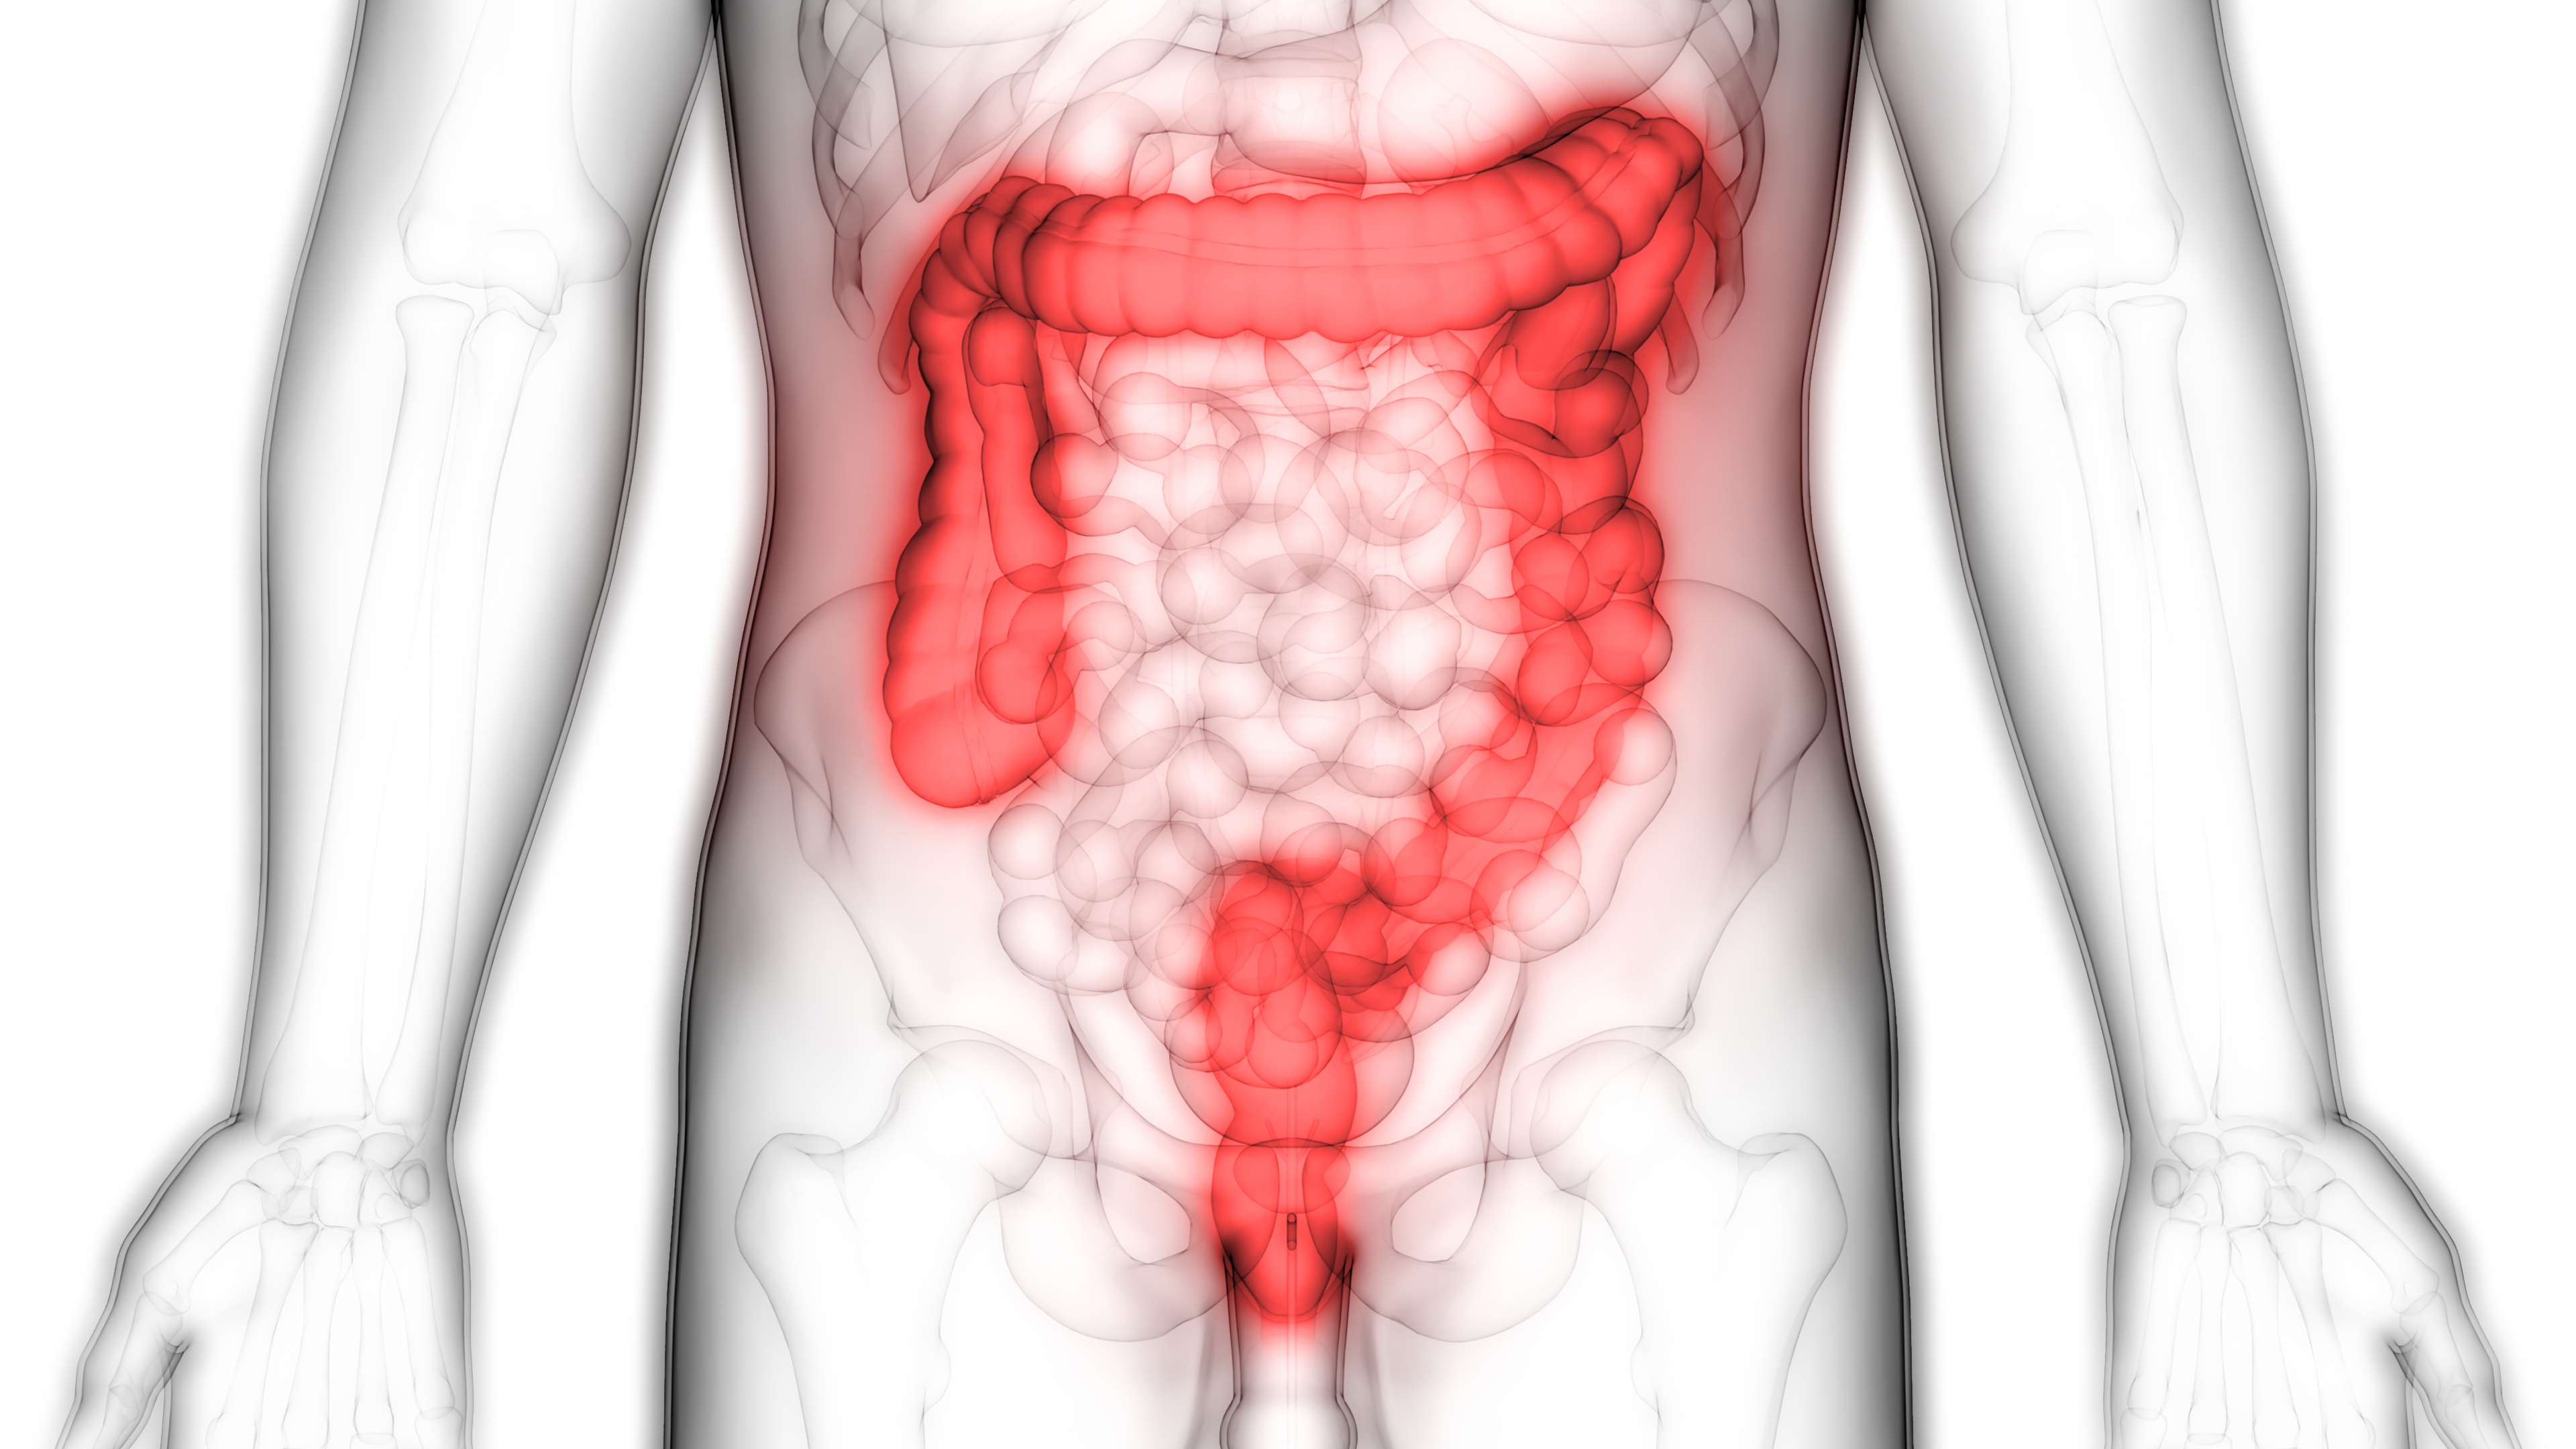 Distinct gut microbiome patterns associate with different subtypes of colorectal cancer